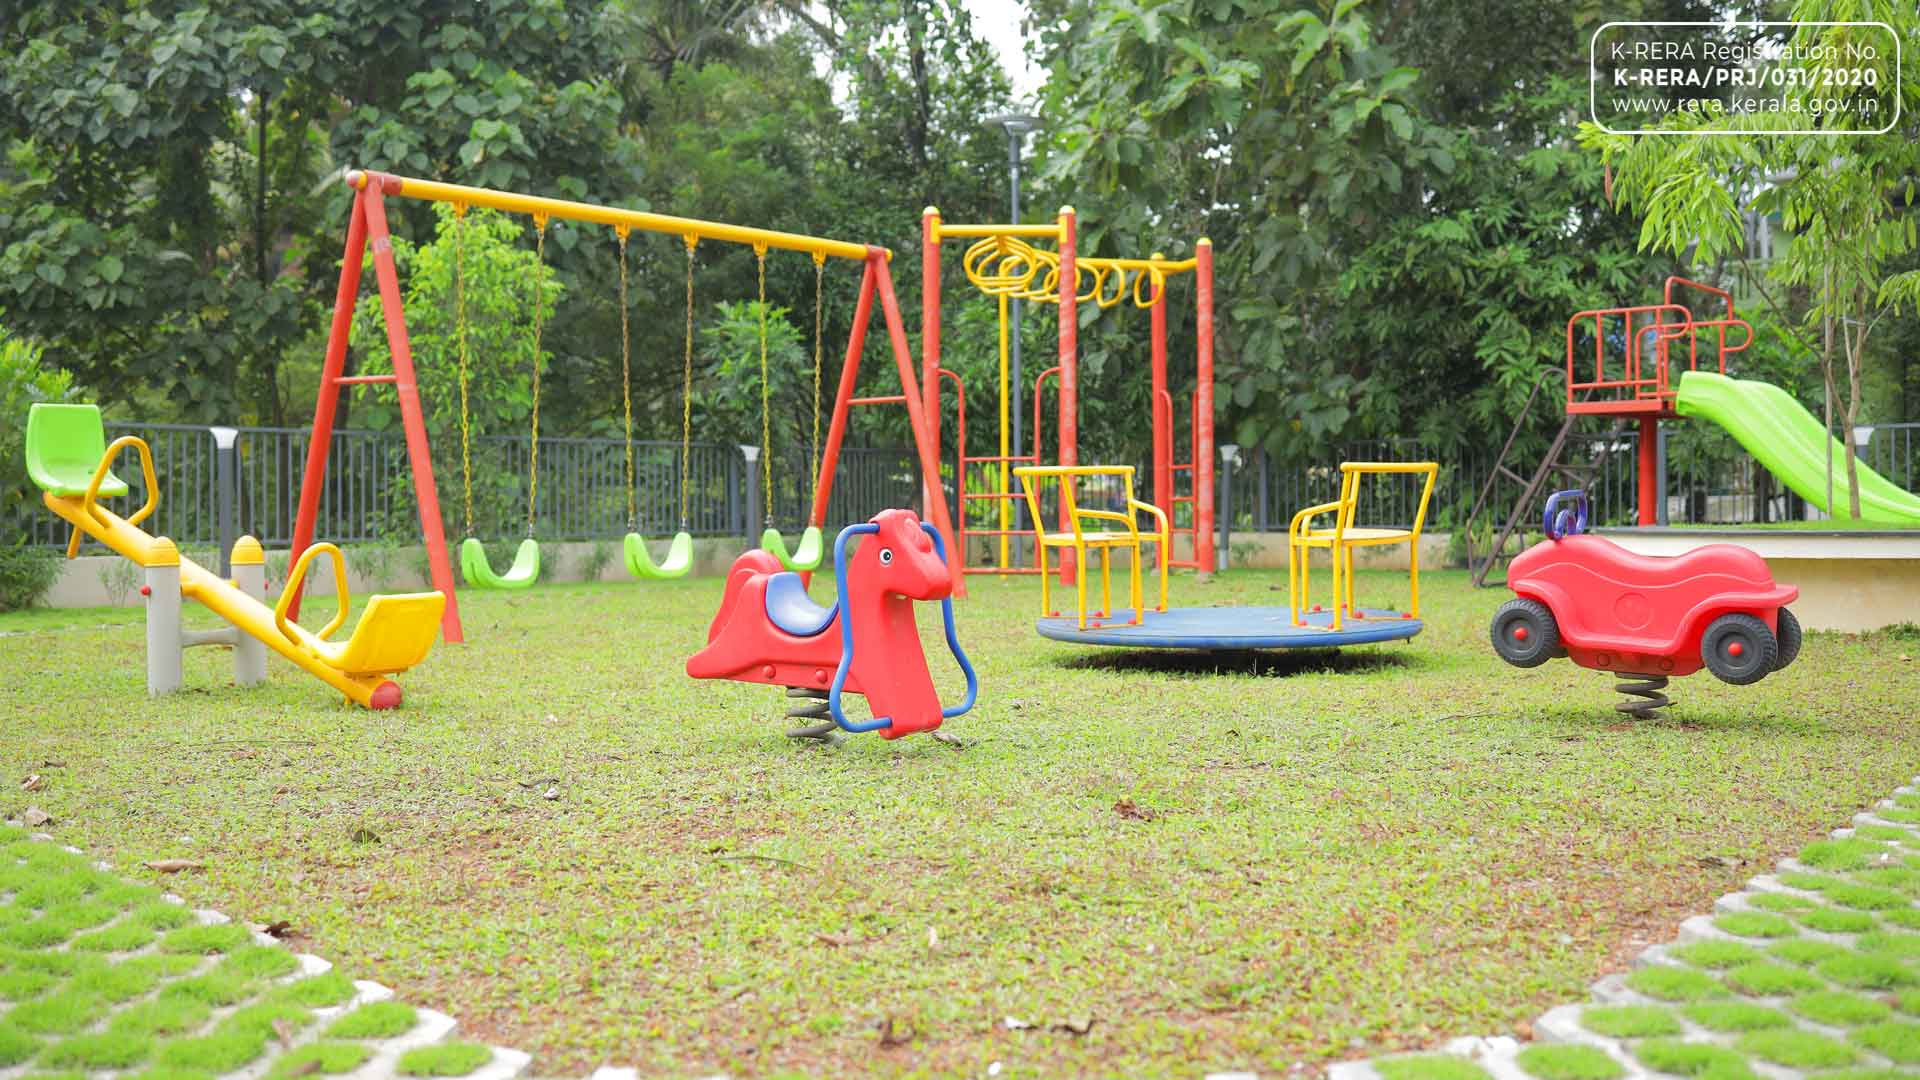 veegaland, veegaland homes, kingsfort, play area, kids play area, childrens play area, flats in kochi, apartments in kochi